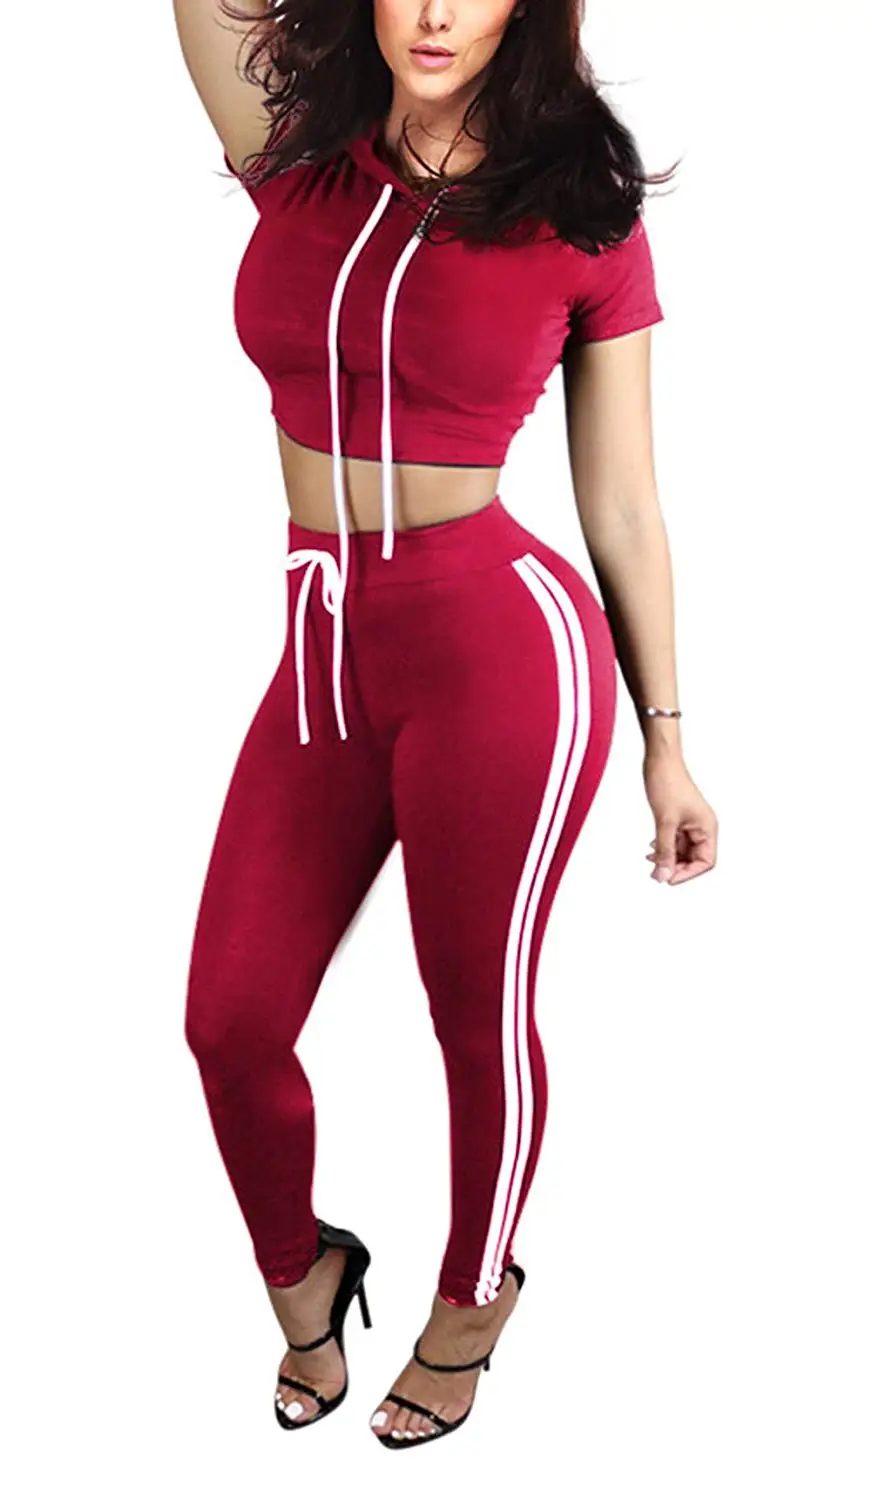 Cheap Shiny Tracksuit, find Shiny Tracksuit deals on line at Alibaba.com